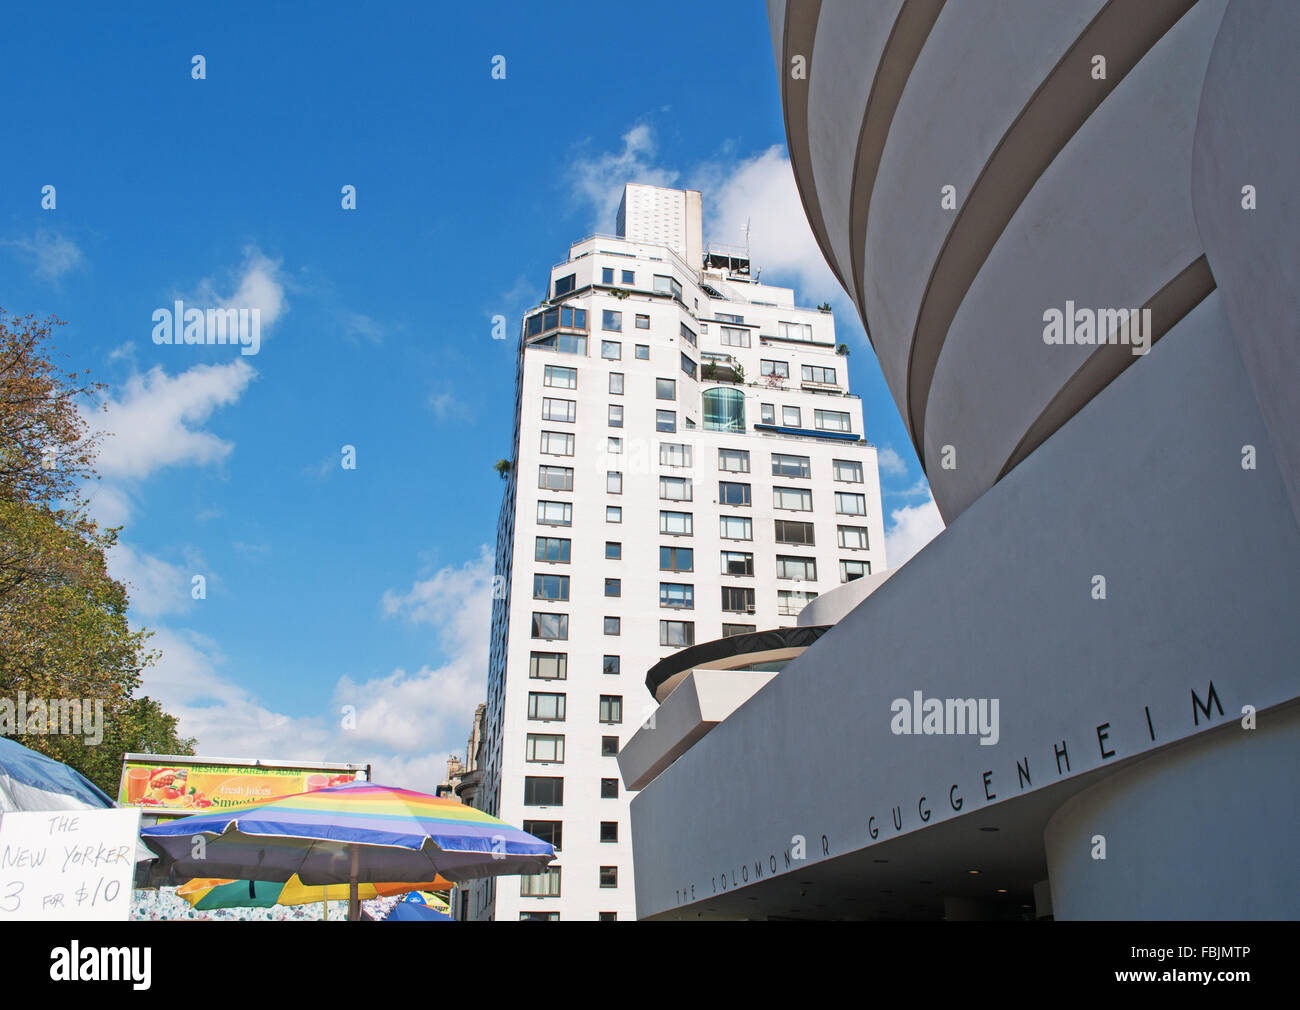 New York, United States of America: skyline and details of the Guggenheim Museum building, the iconic landmark designed by Frank Lloyd Wright Stock Photo